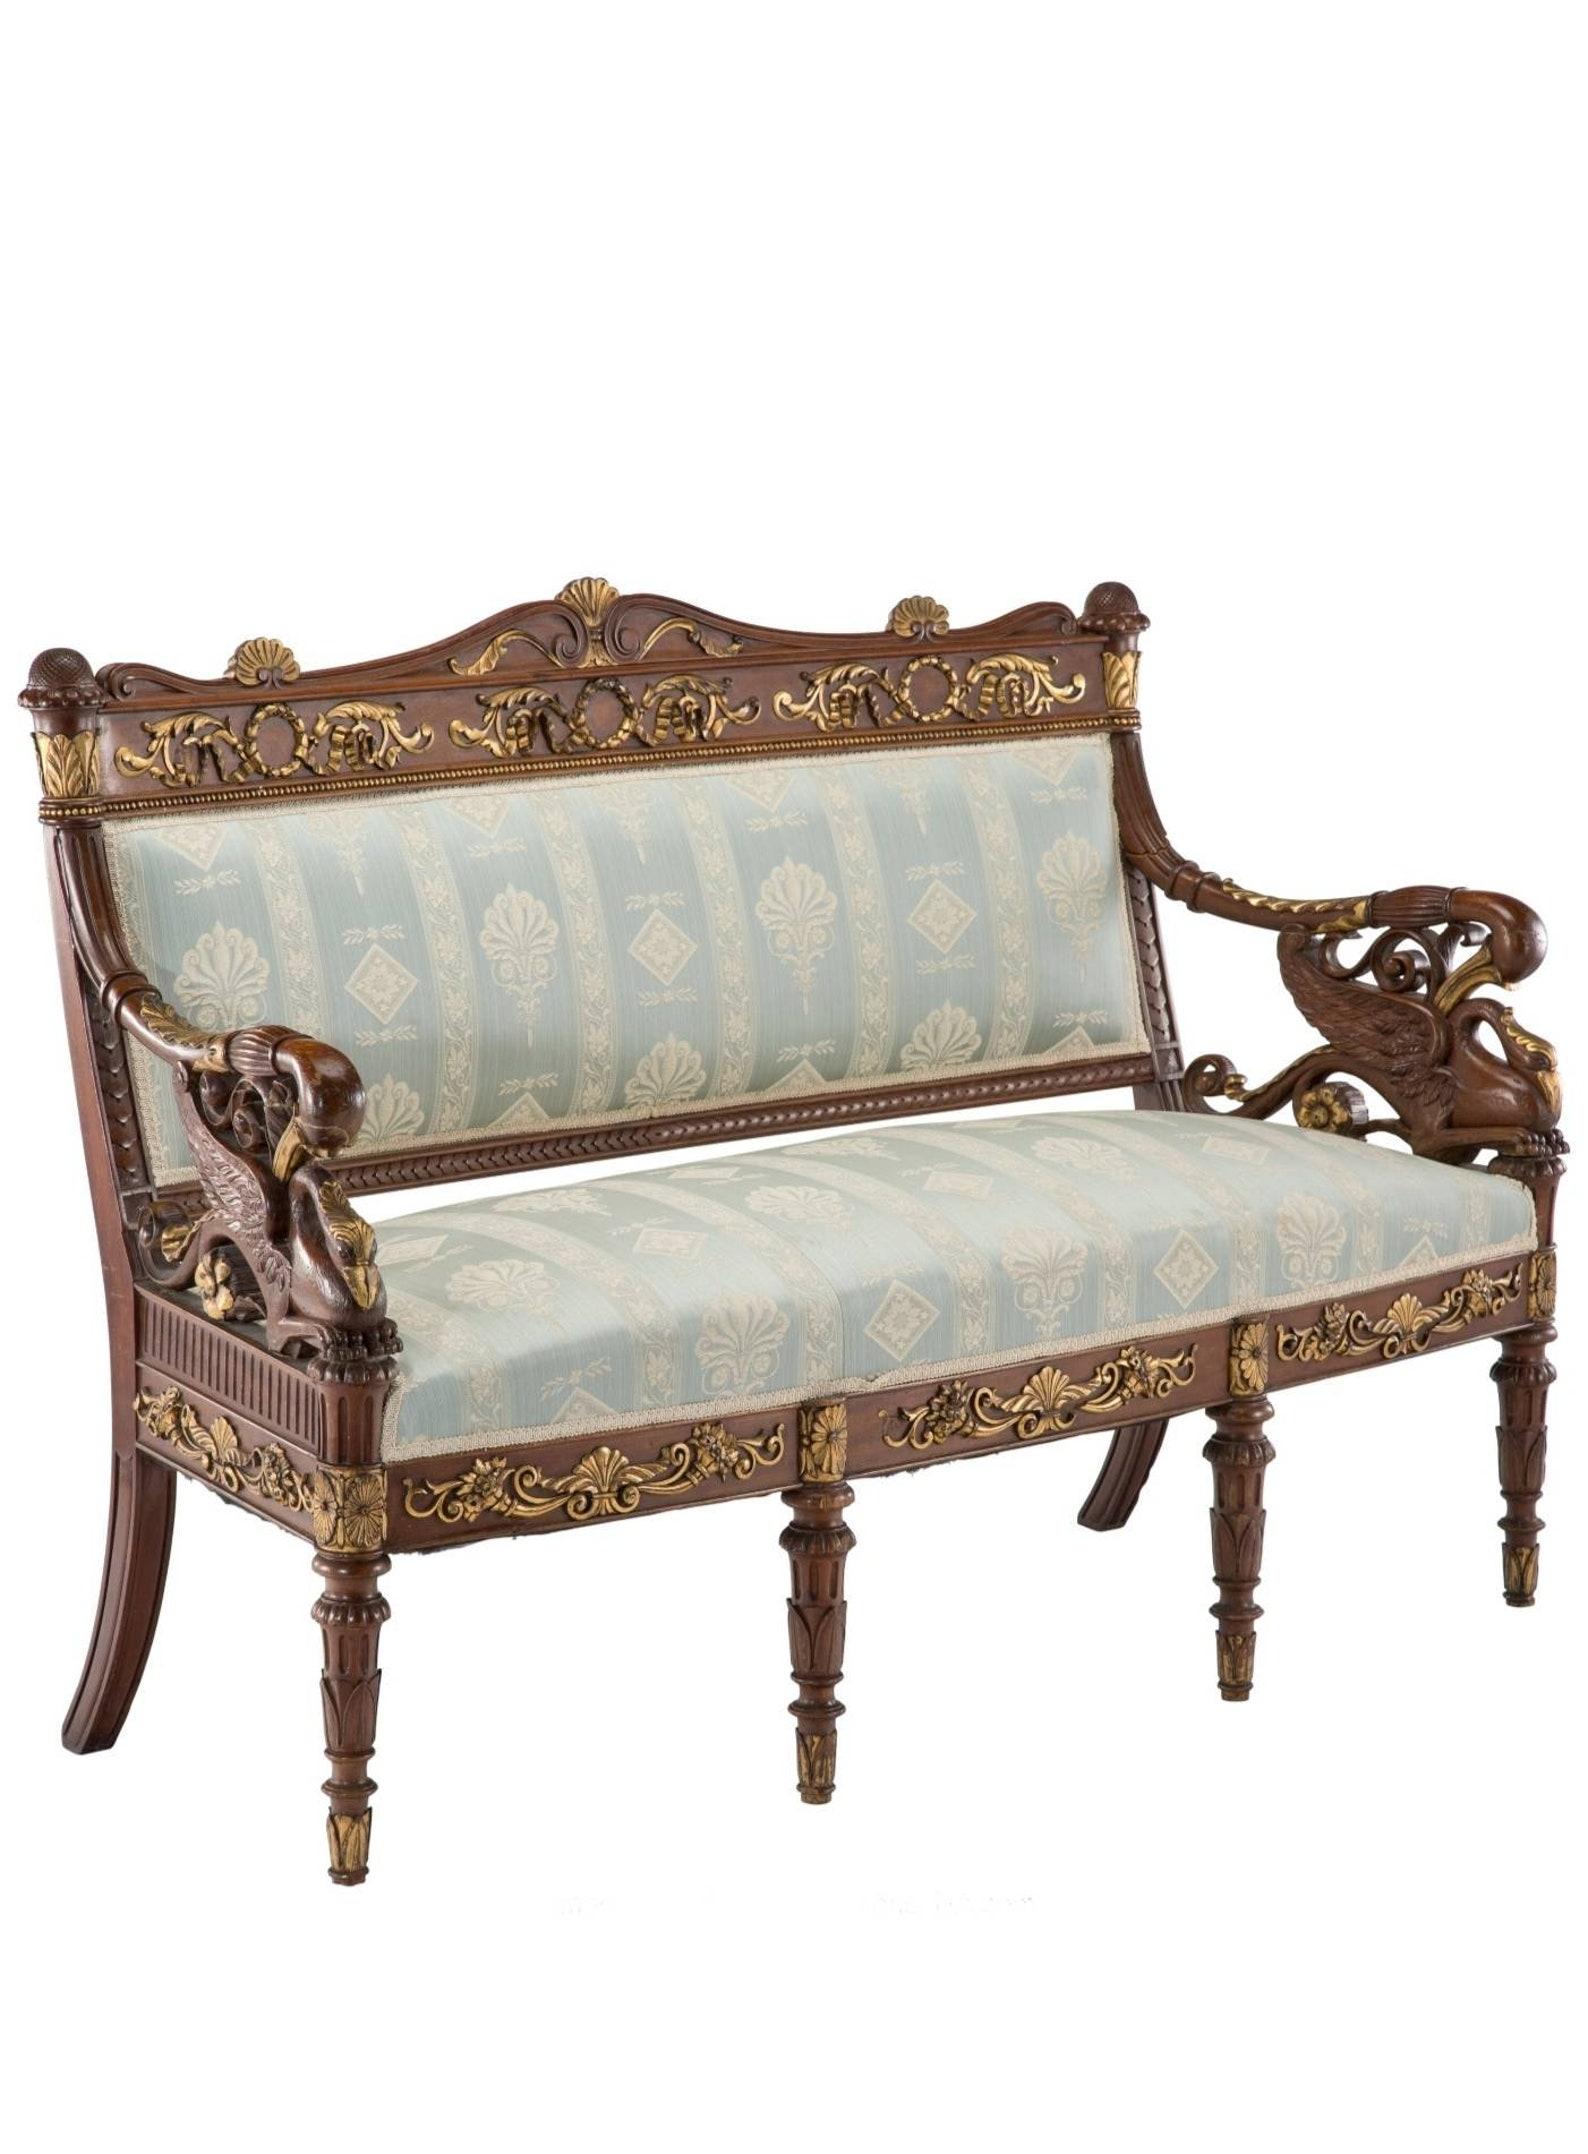 Carved 19th Century Russian Empire Period Neoclassical Salon Suite For Sale